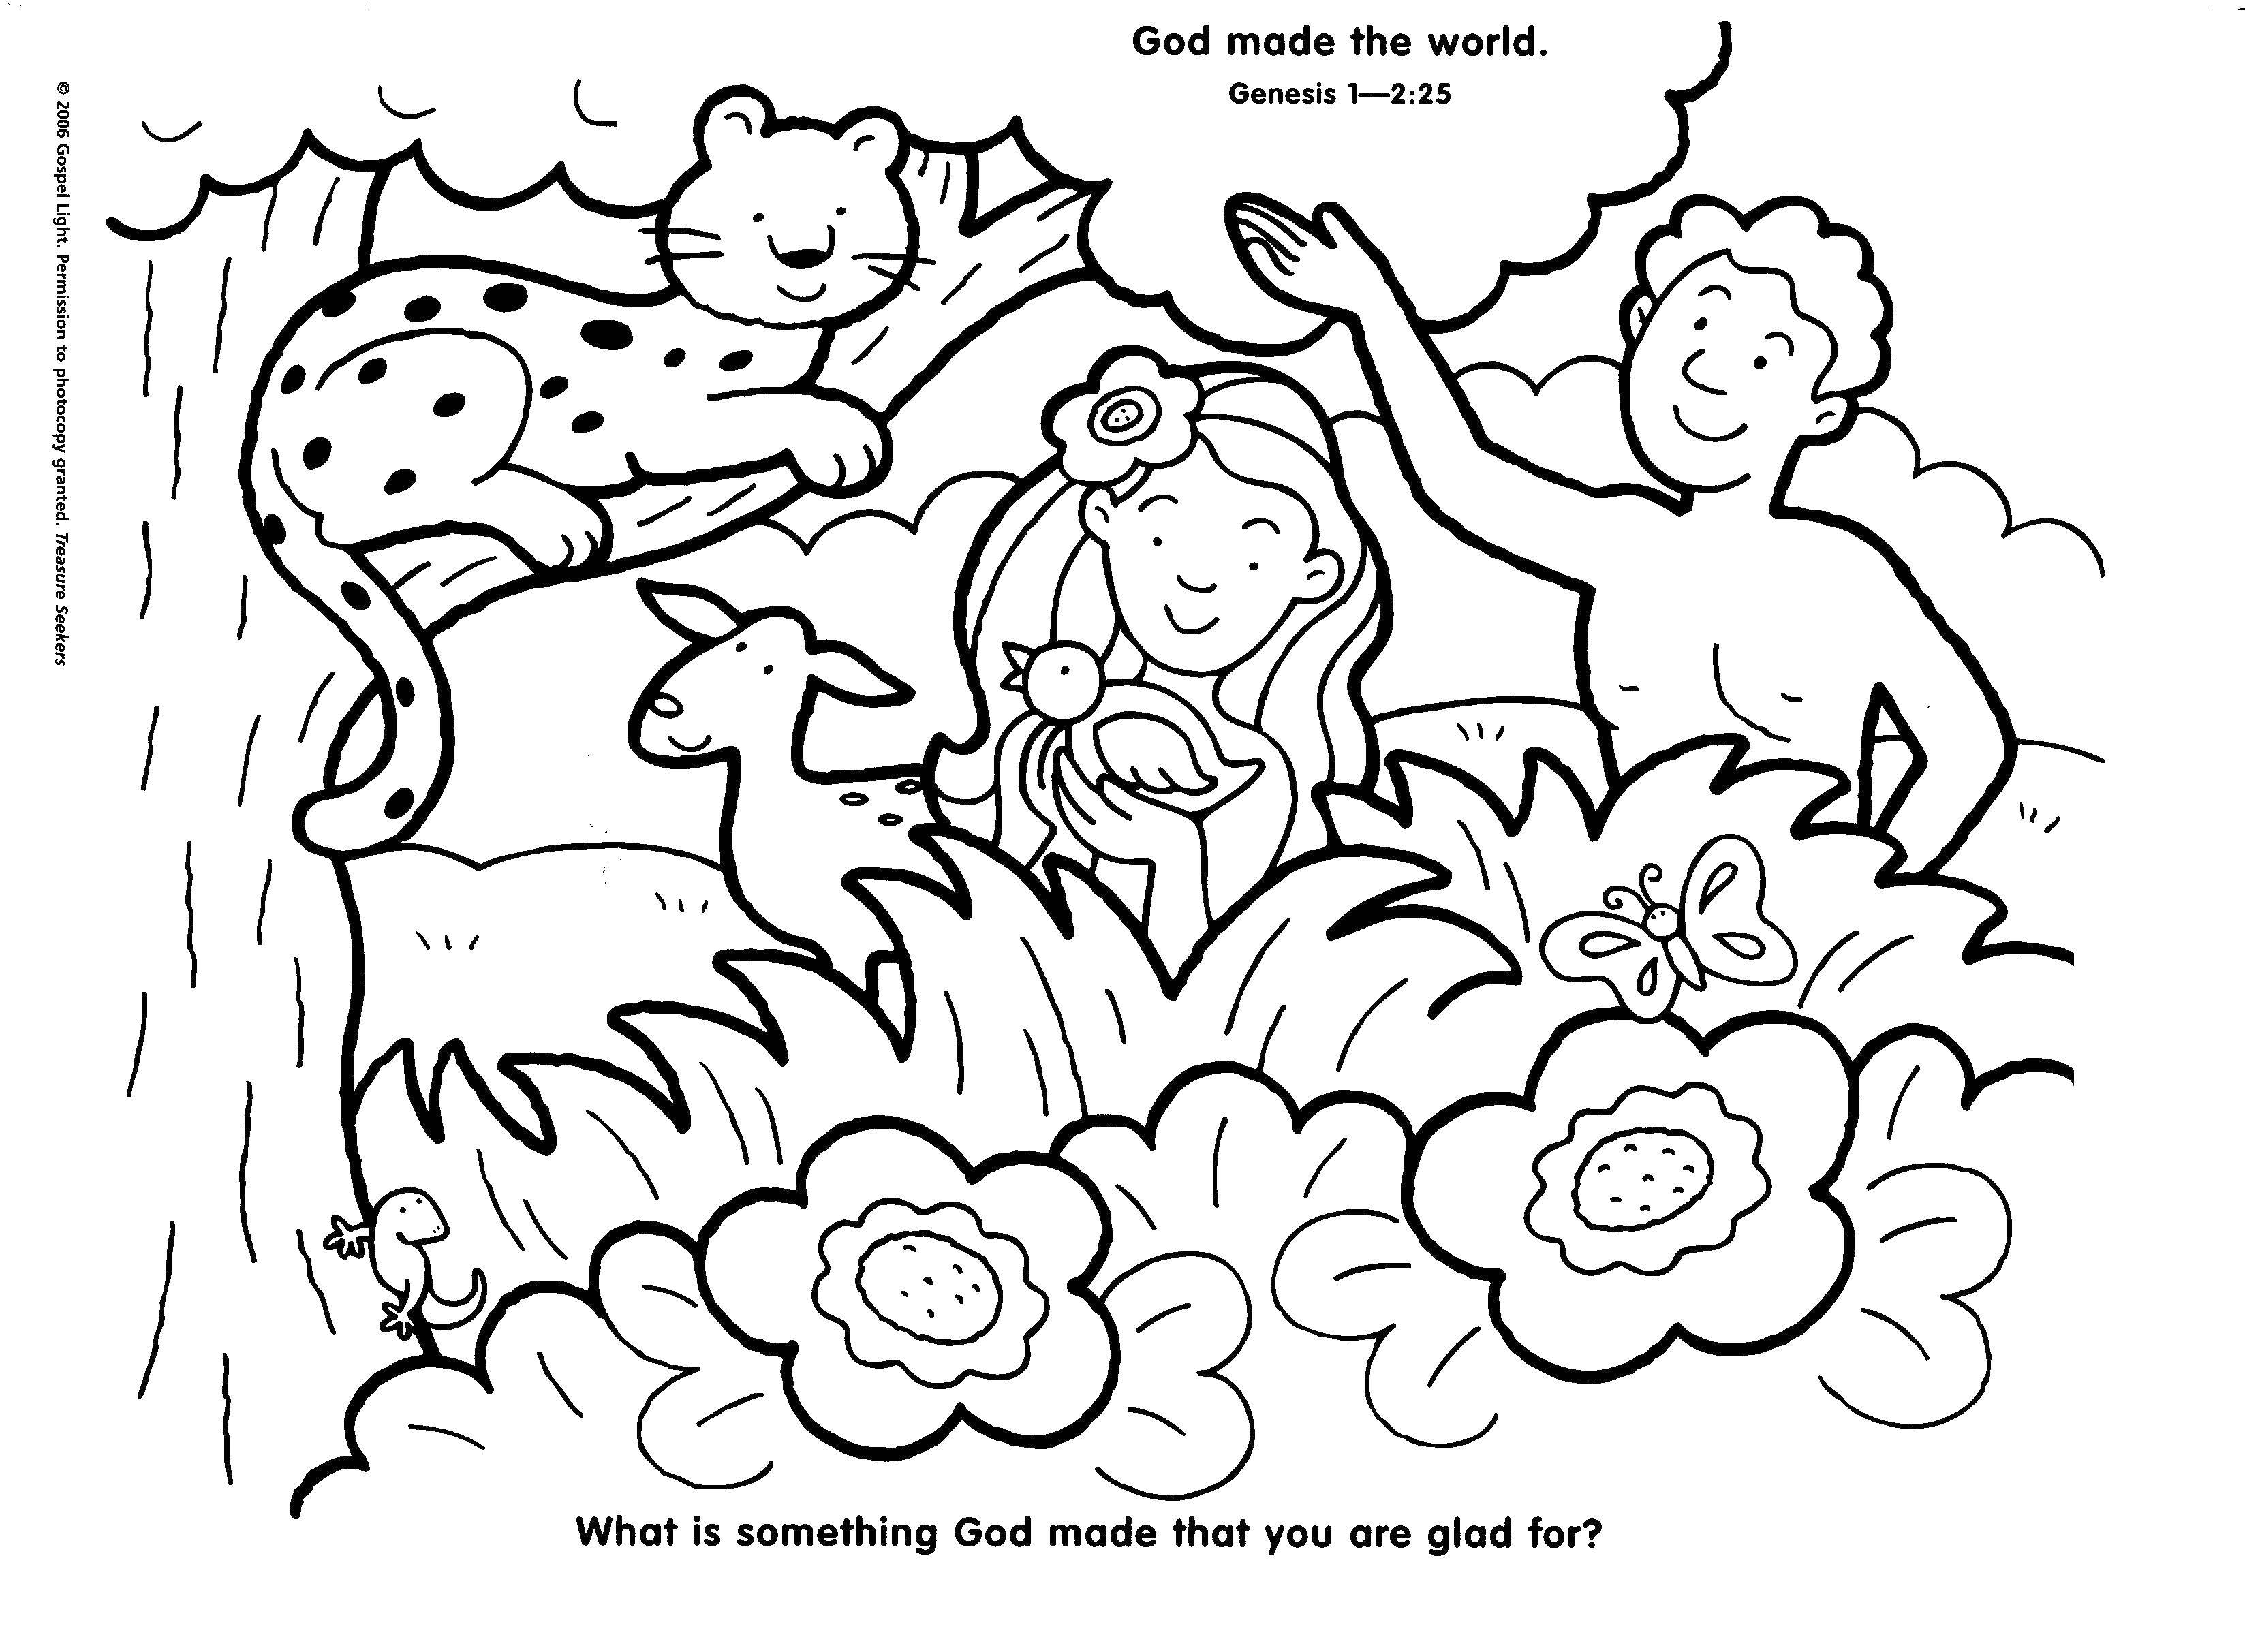 Coloring Adam and eve with animals. Category the Bible. Tags:  Adam, eve, world, earth.